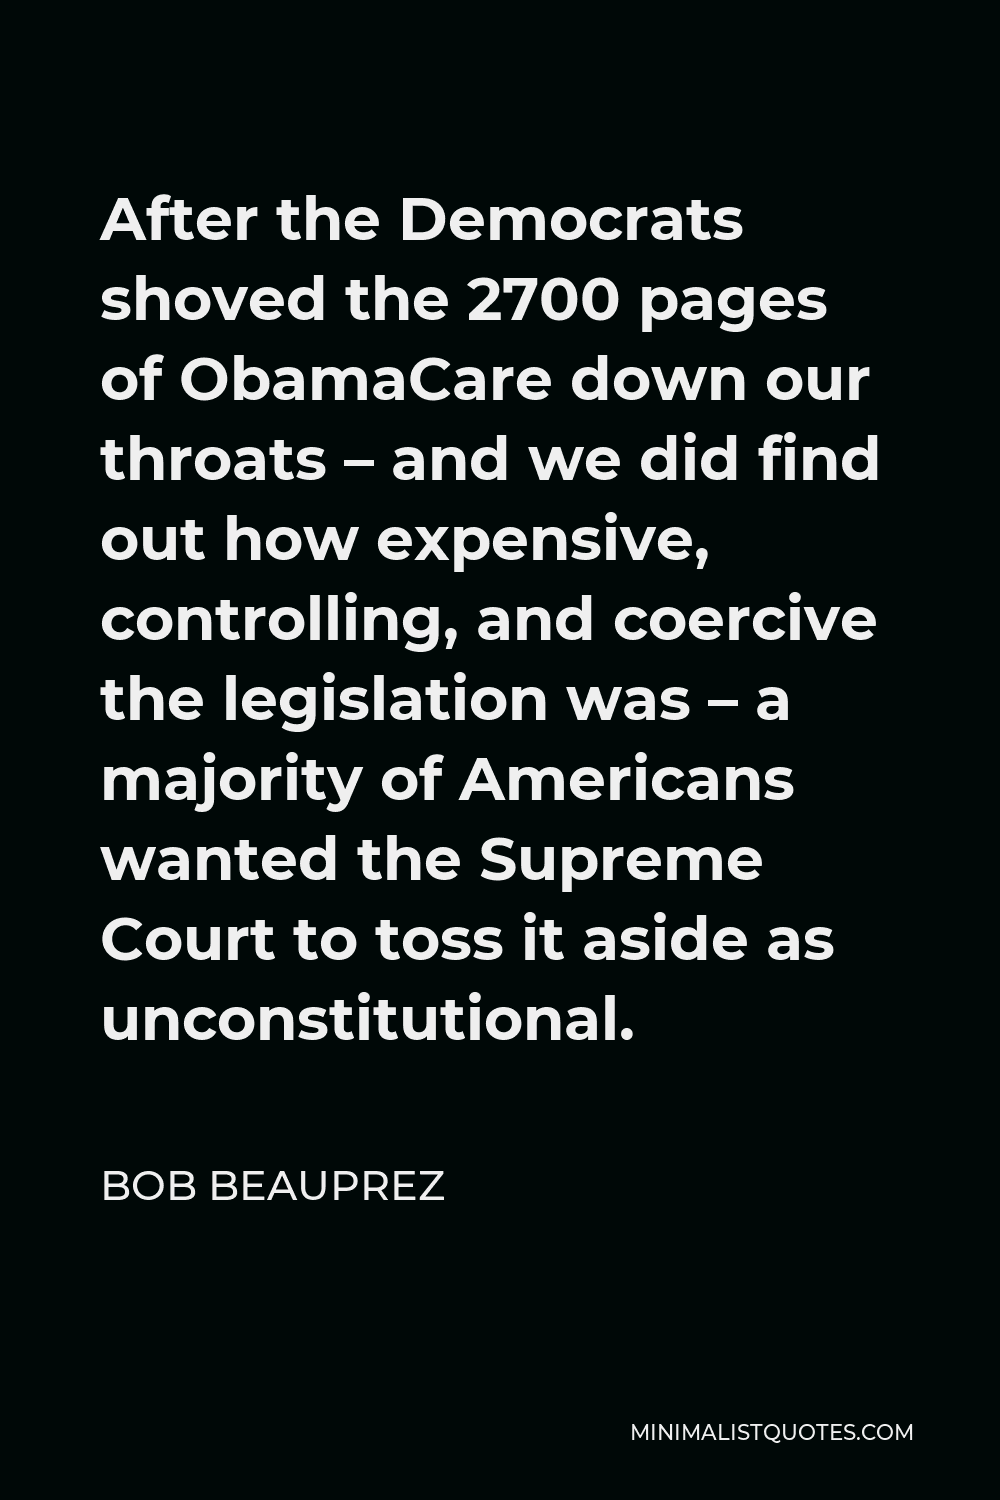 Bob Beauprez Quote - After the Democrats shoved the 2700 pages of ObamaCare down our throats – and we did find out how expensive, controlling, and coercive the legislation was – a majority of Americans wanted the Supreme Court to toss it aside as unconstitutional.